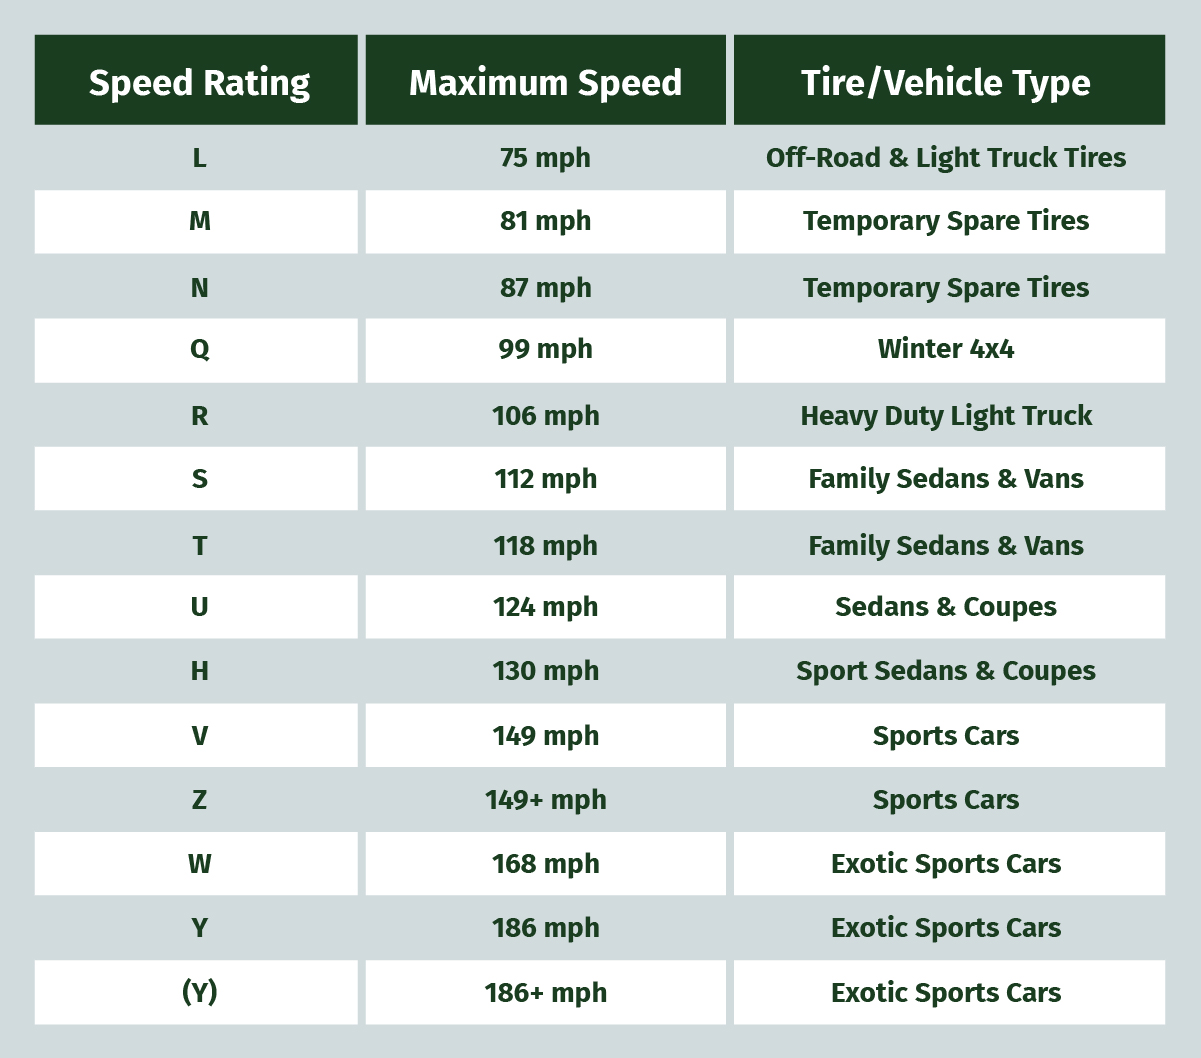 A chart of the most common tire speed ratings ranging from temporary spare tires to exotic sports car tires (Ratings L to Y).